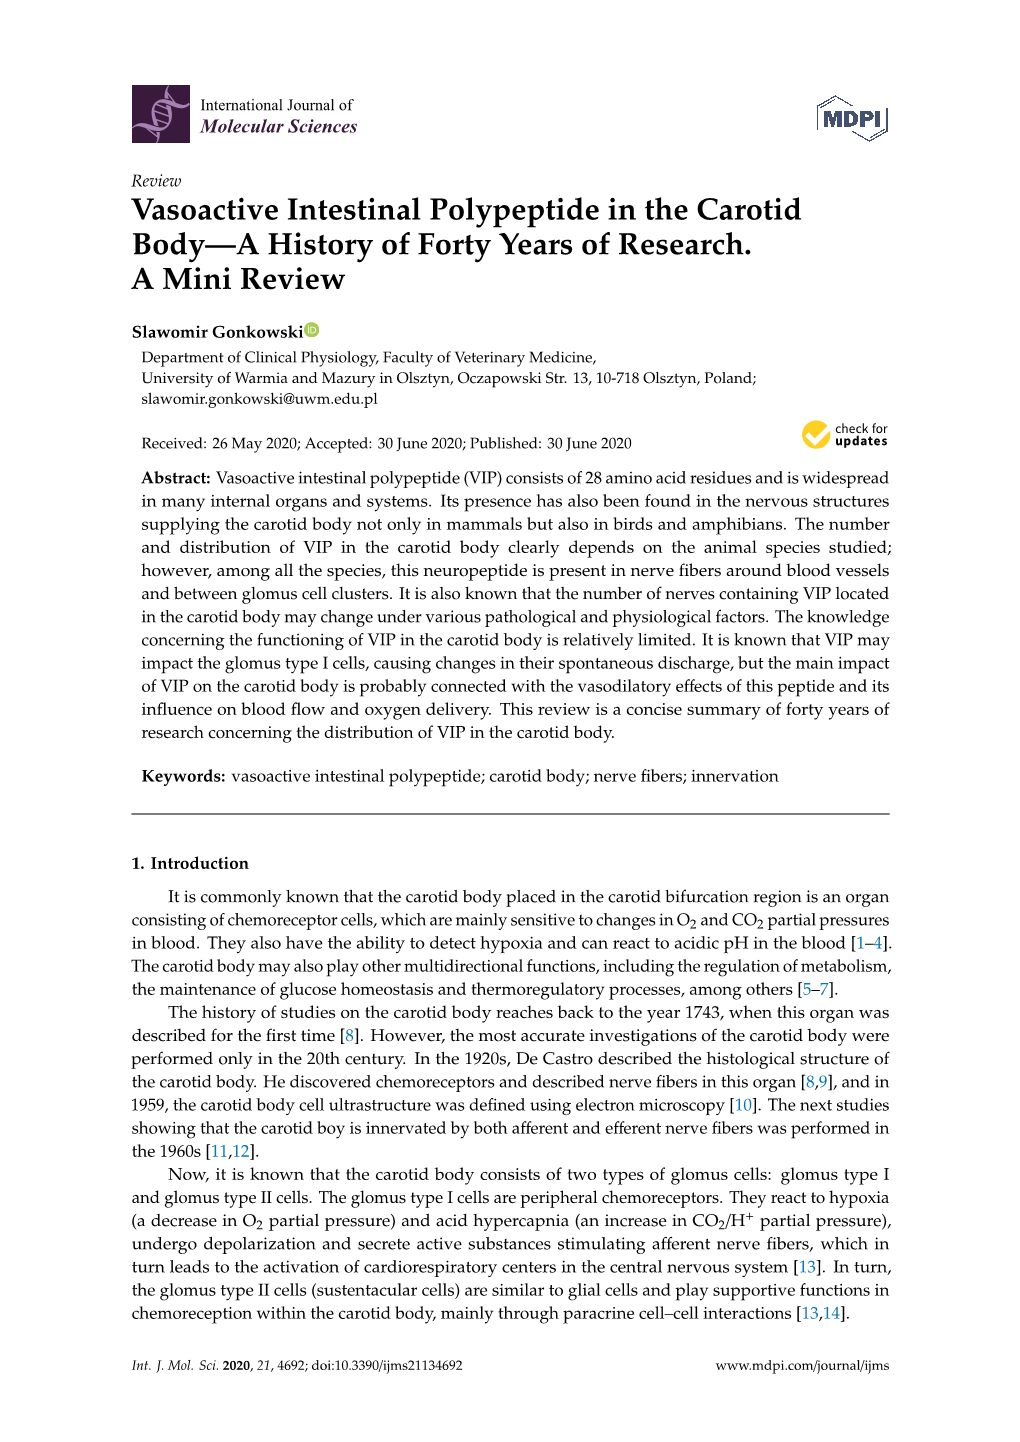 Vasoactive Intestinal Polypeptide in the Carotid Body—A History of Forty Years of Research